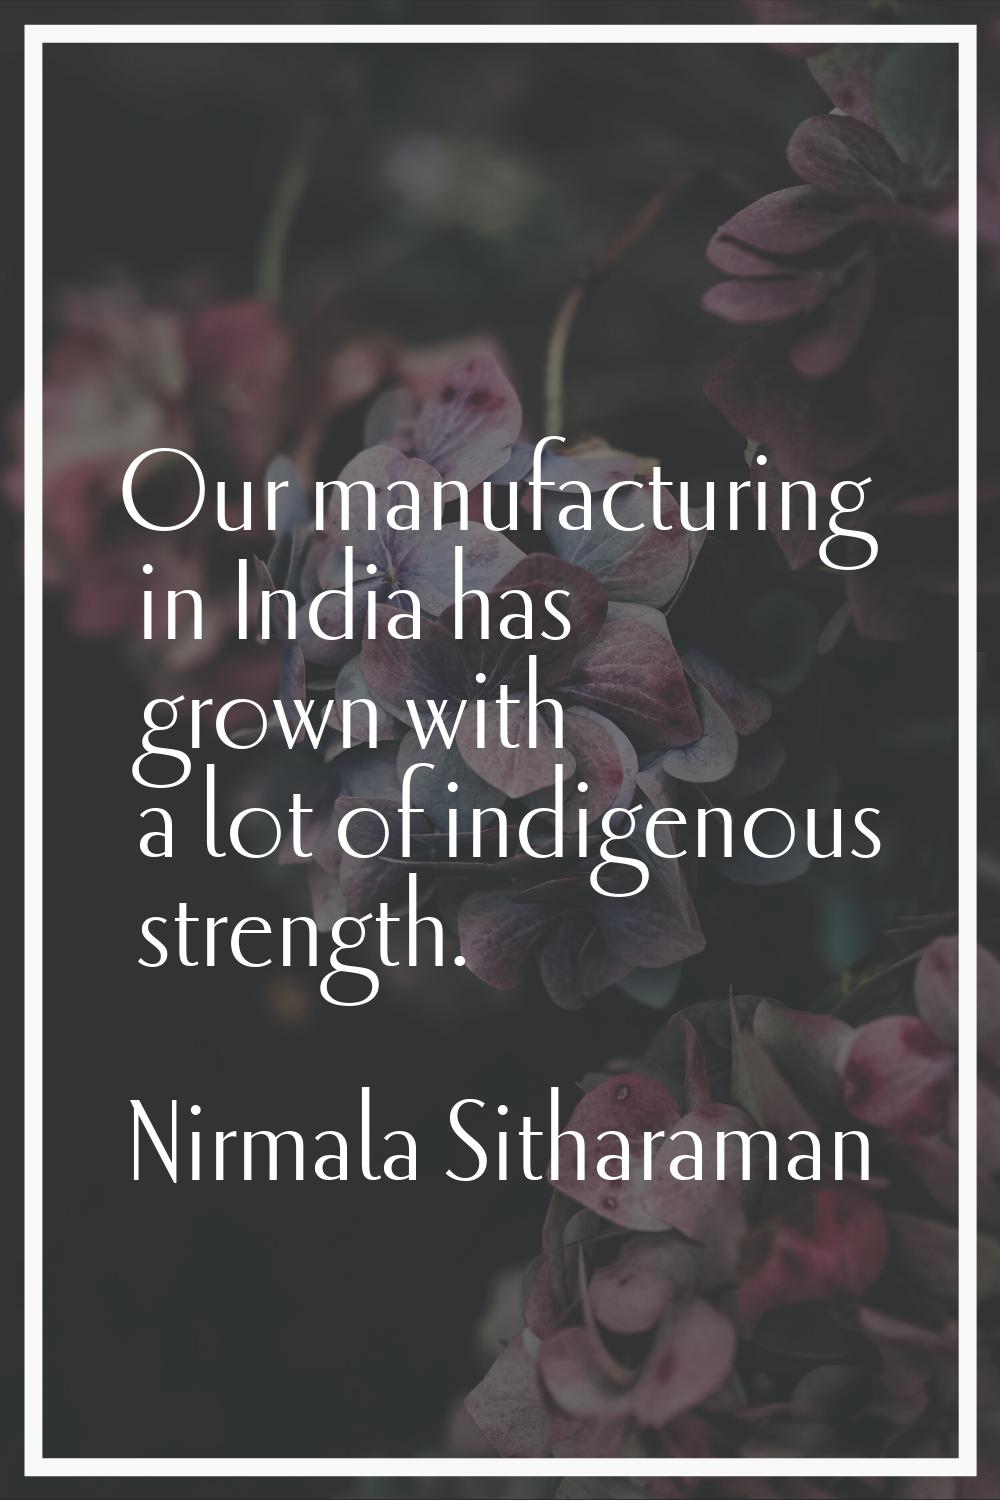 Our manufacturing in India has grown with a lot of indigenous strength.